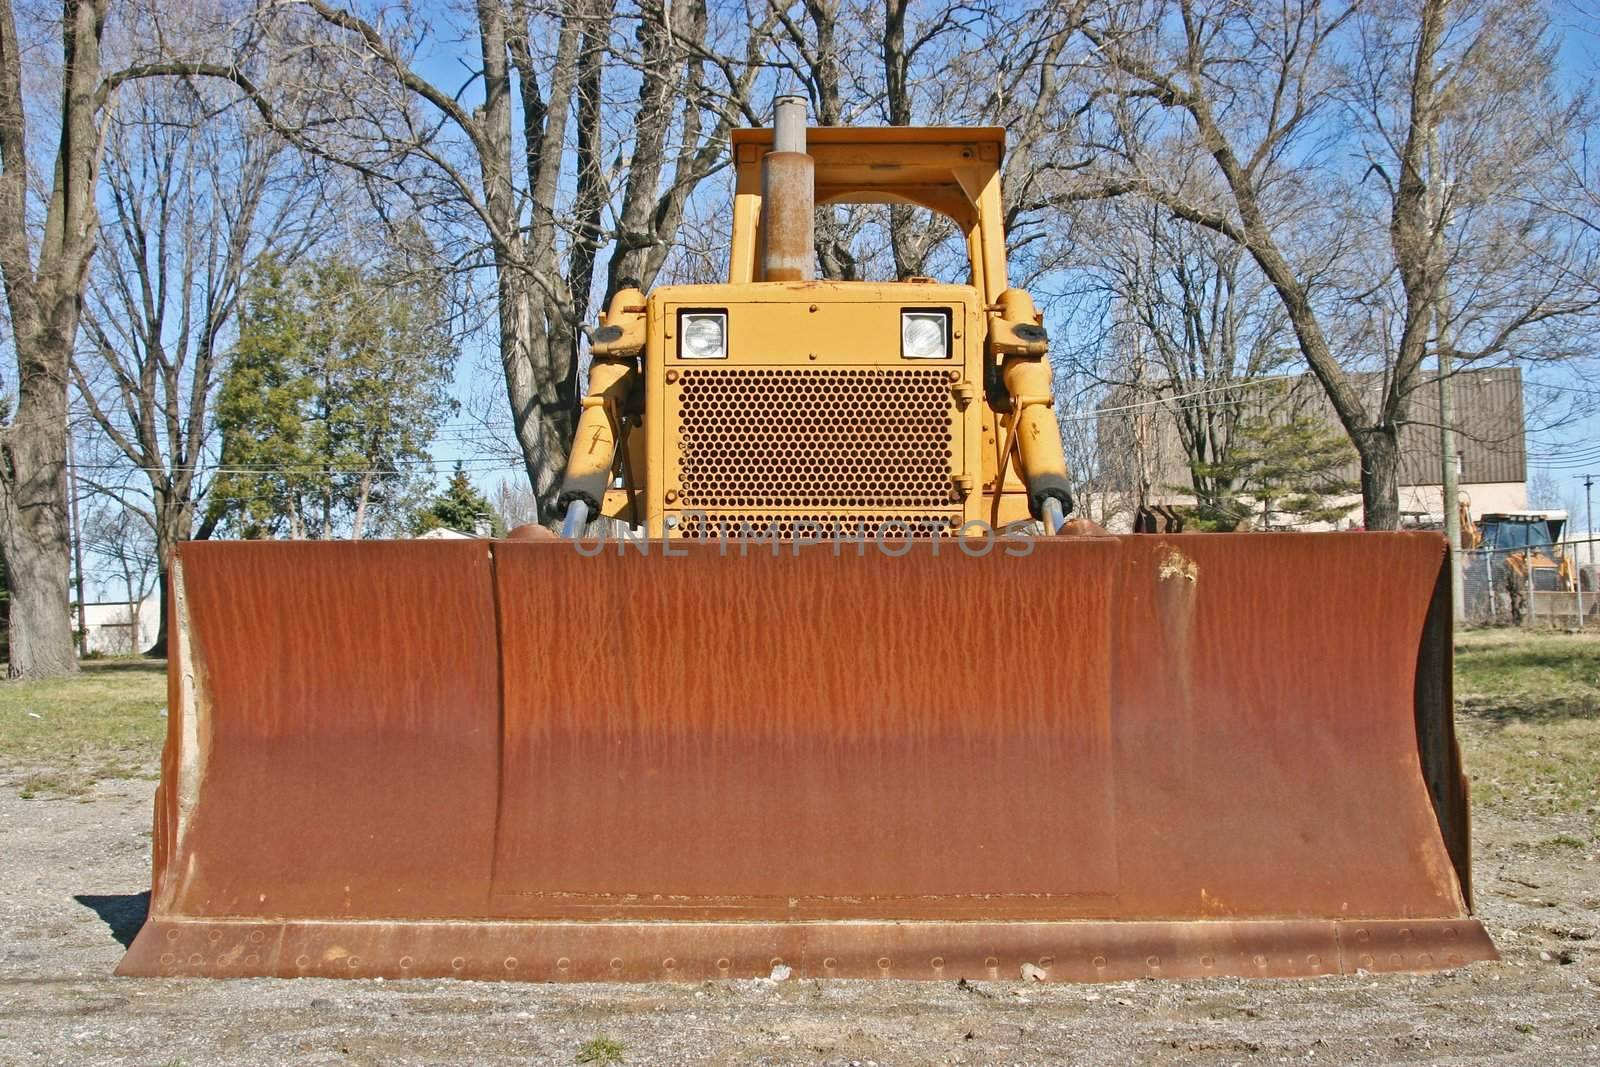 This is the front view of a well worn bulldozer. 